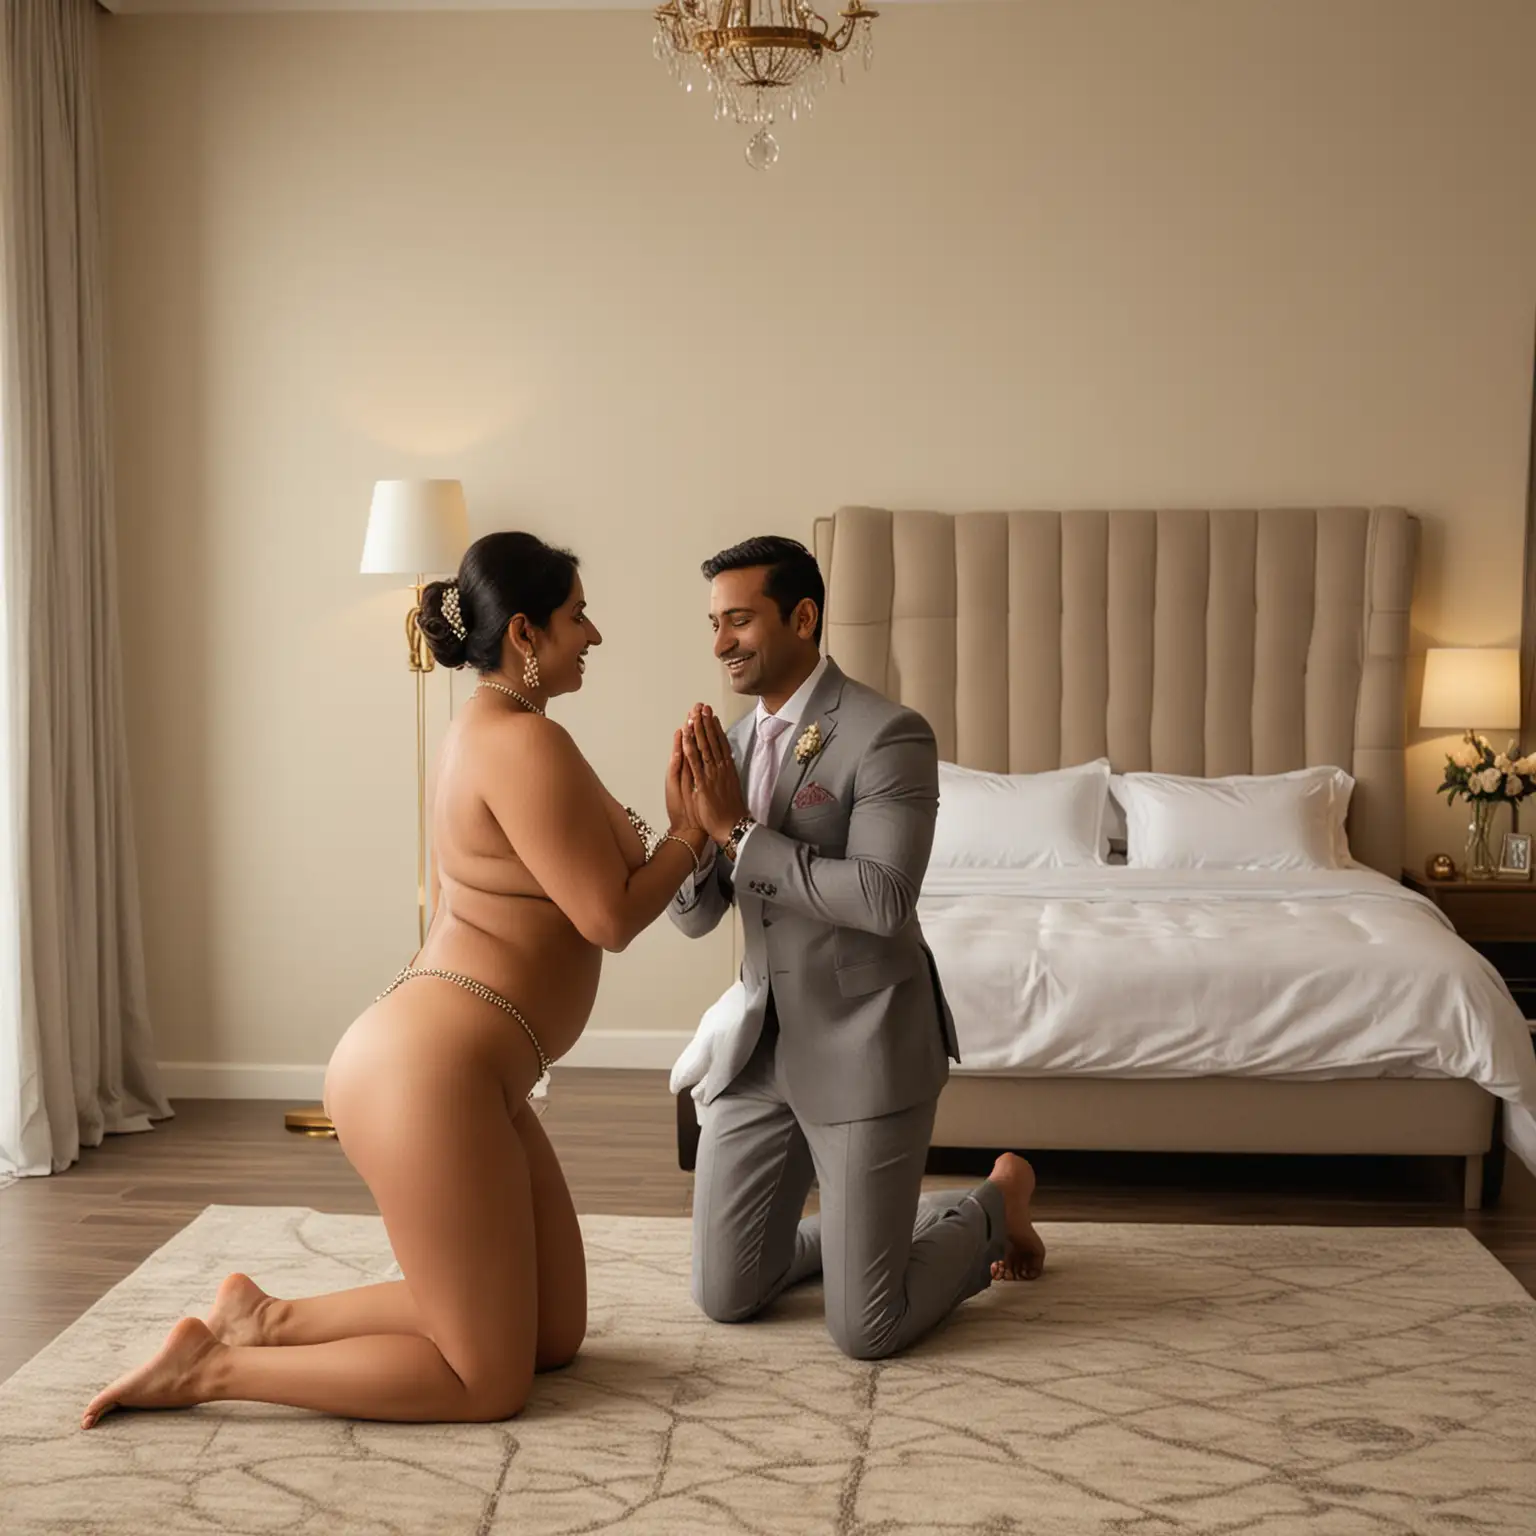 Generate full body image of a 40 year old very busty and curvy fully naked Indian woman wearing jewelry kneeling down and doing namaste in front of her boyfriend who is standing and proposing to her while wearing a formal suit in a hotel bedroom